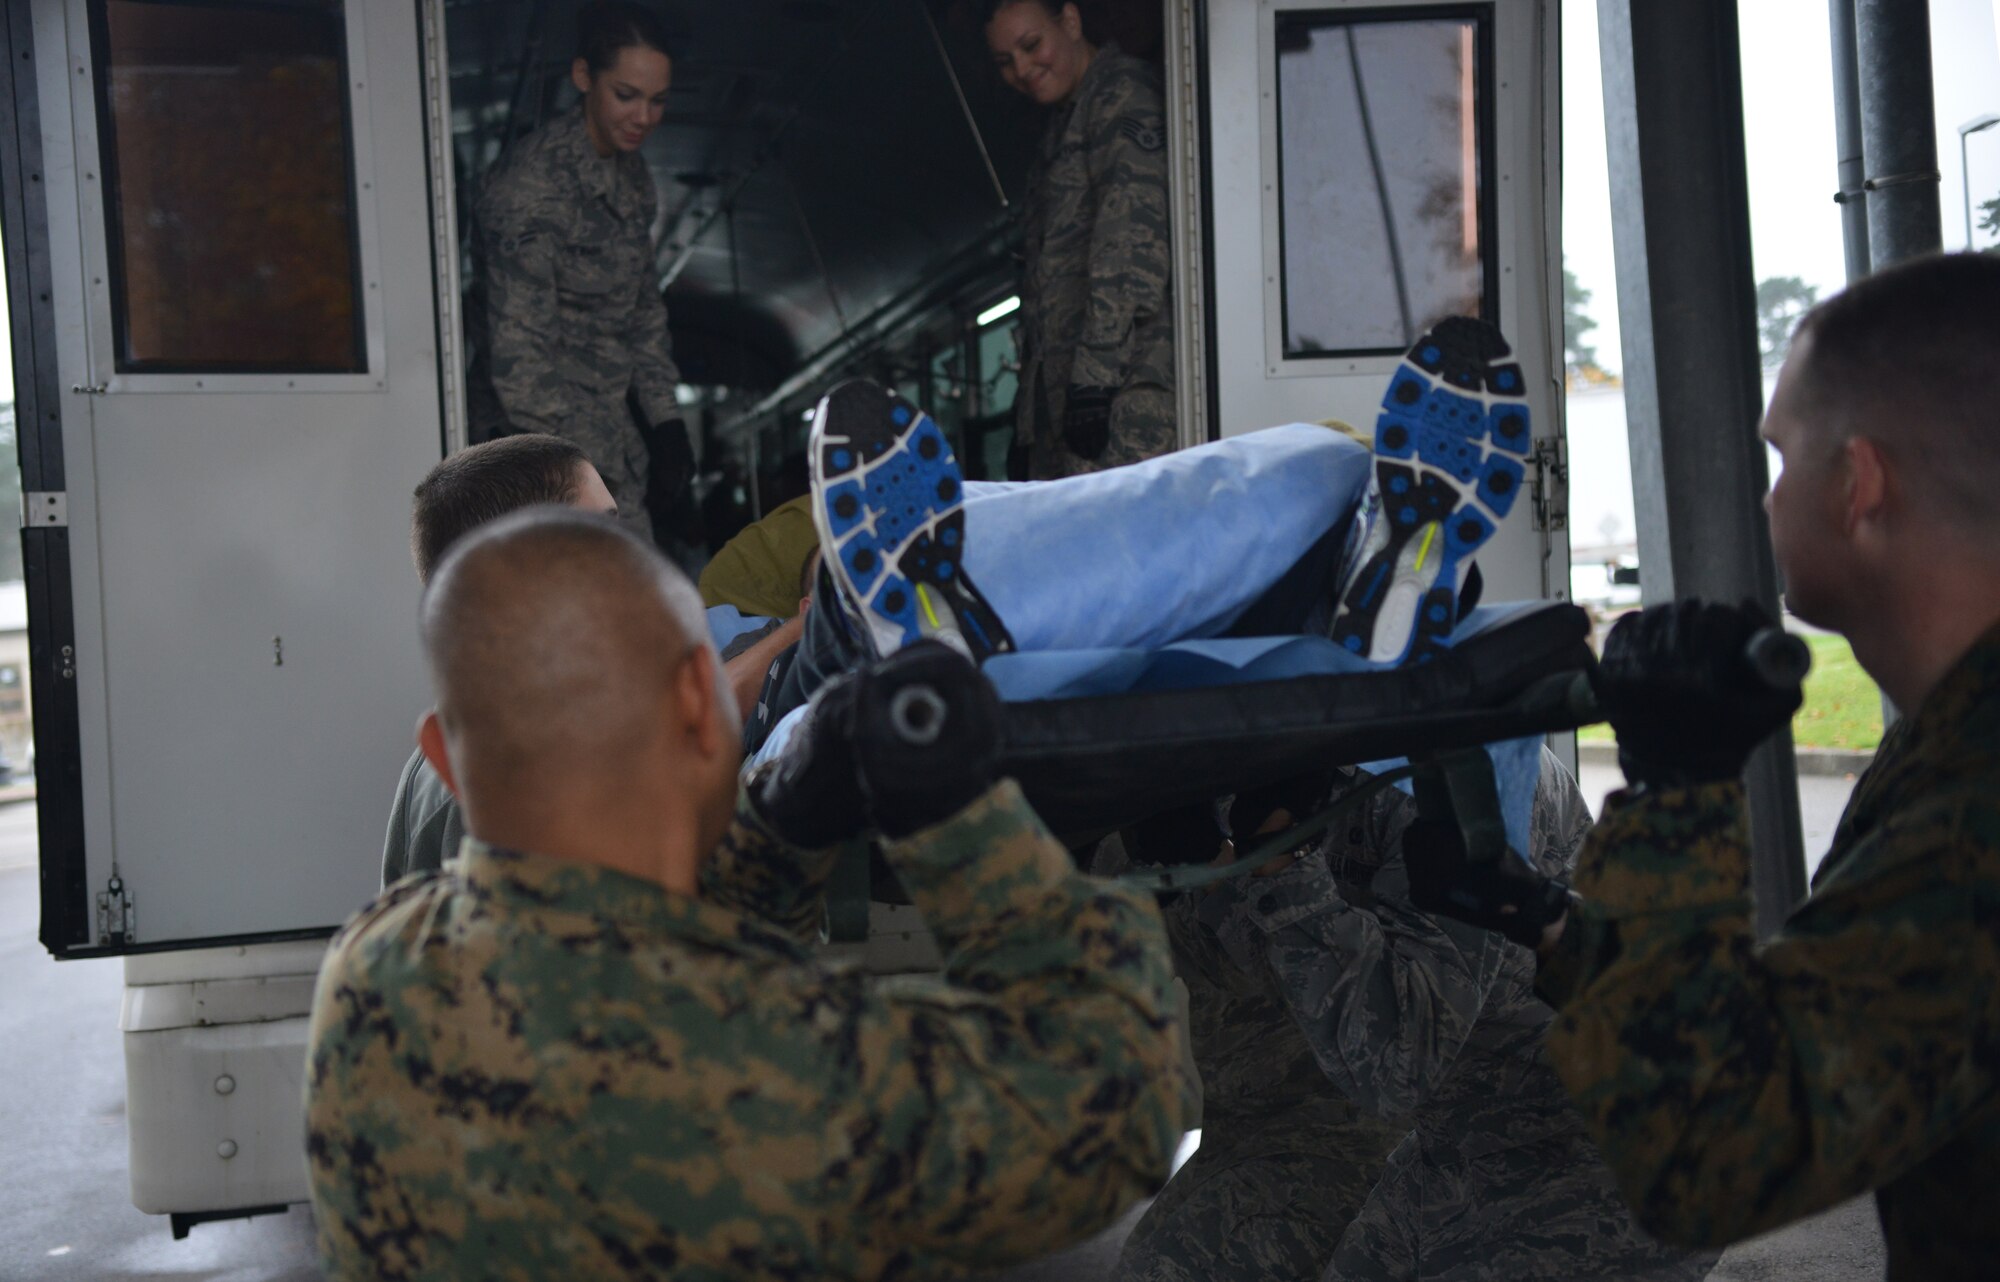 A group of Airmen and Marines load a patient onto a medical bus to take them to the flightline on Ramstein Air Base, Germany, Nov. 20, 2014. Contingency Aeromedical Staging Facility members wait to get the wheels up call before ending their day. (U.S. Air Force photo/Senior Airman Hailey Haux)